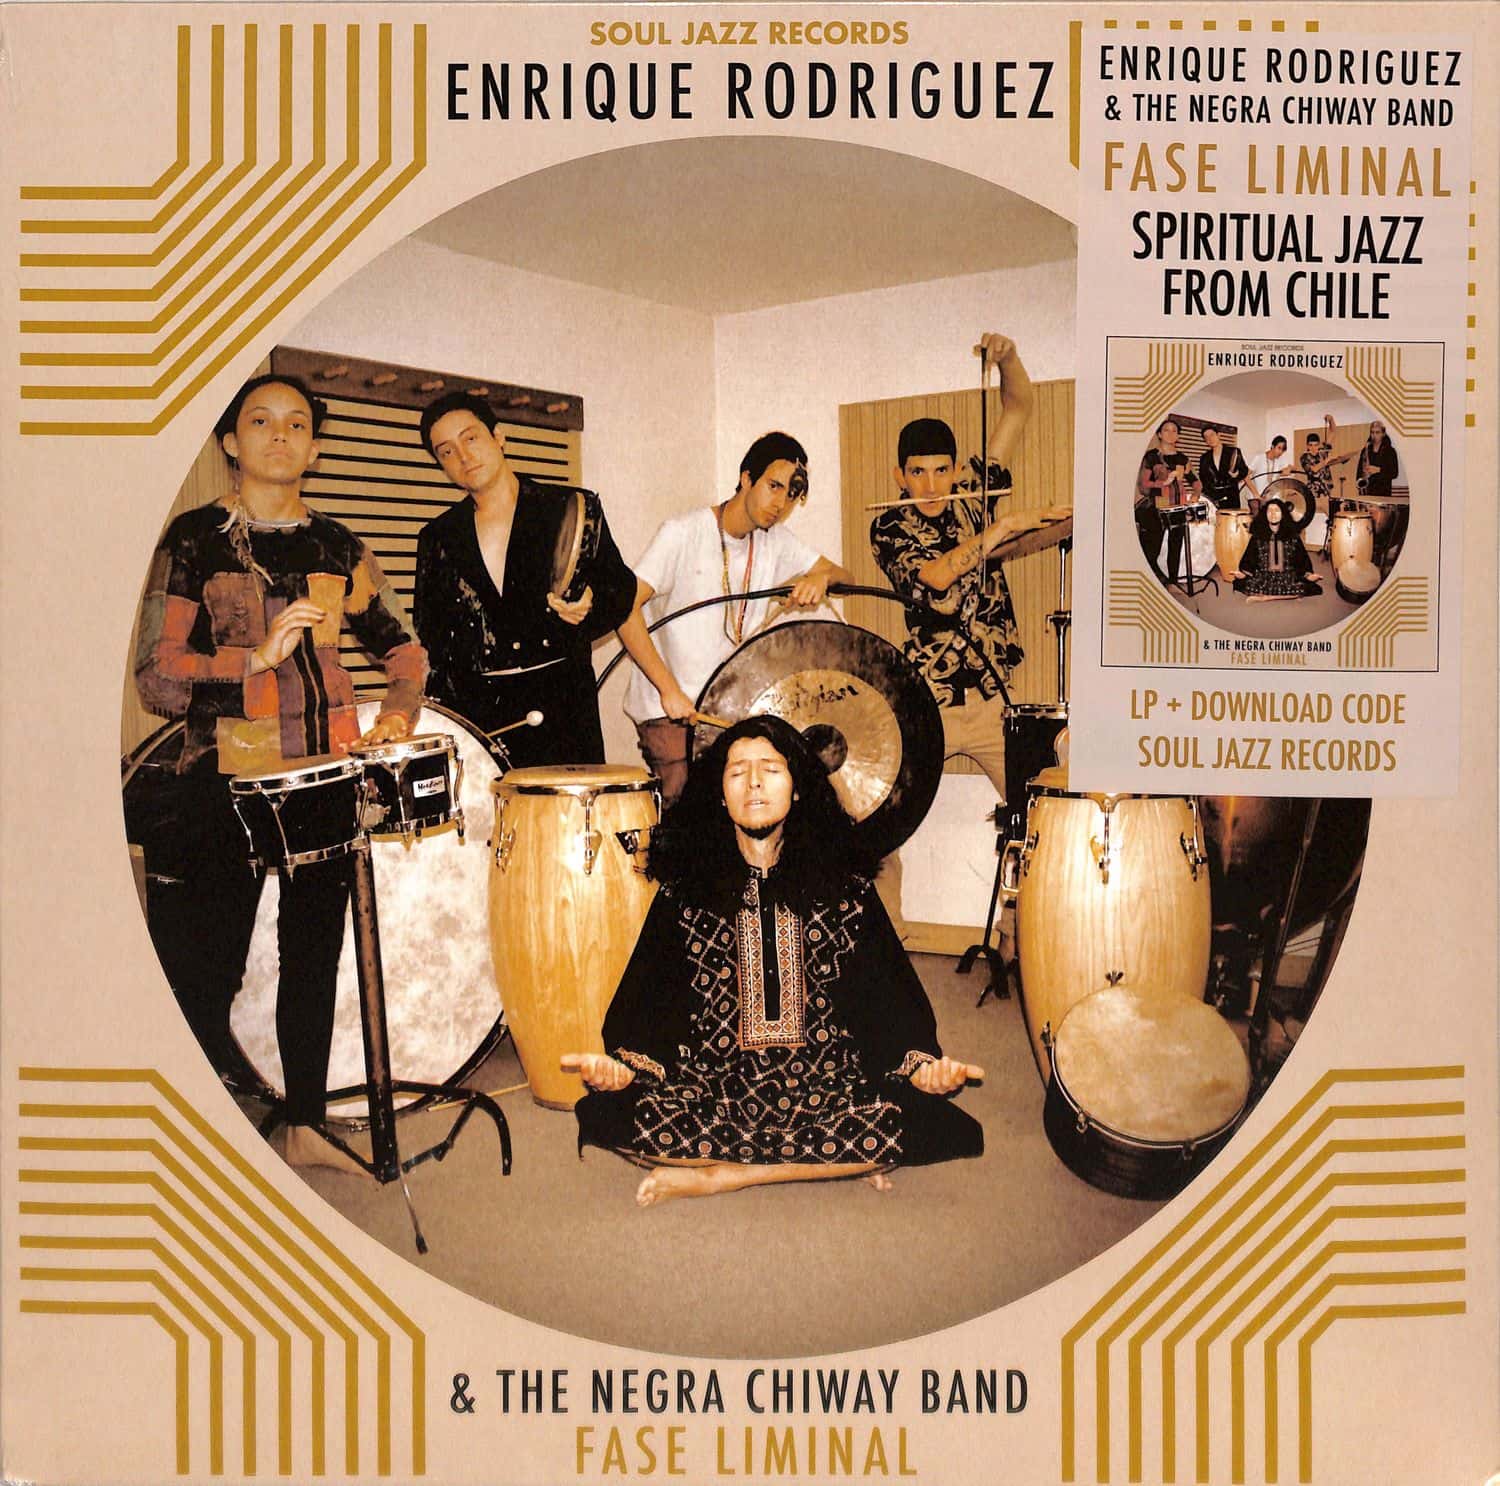 Enrique Rodriguez & The Negra Chiway Band - FASE LIMINAL 